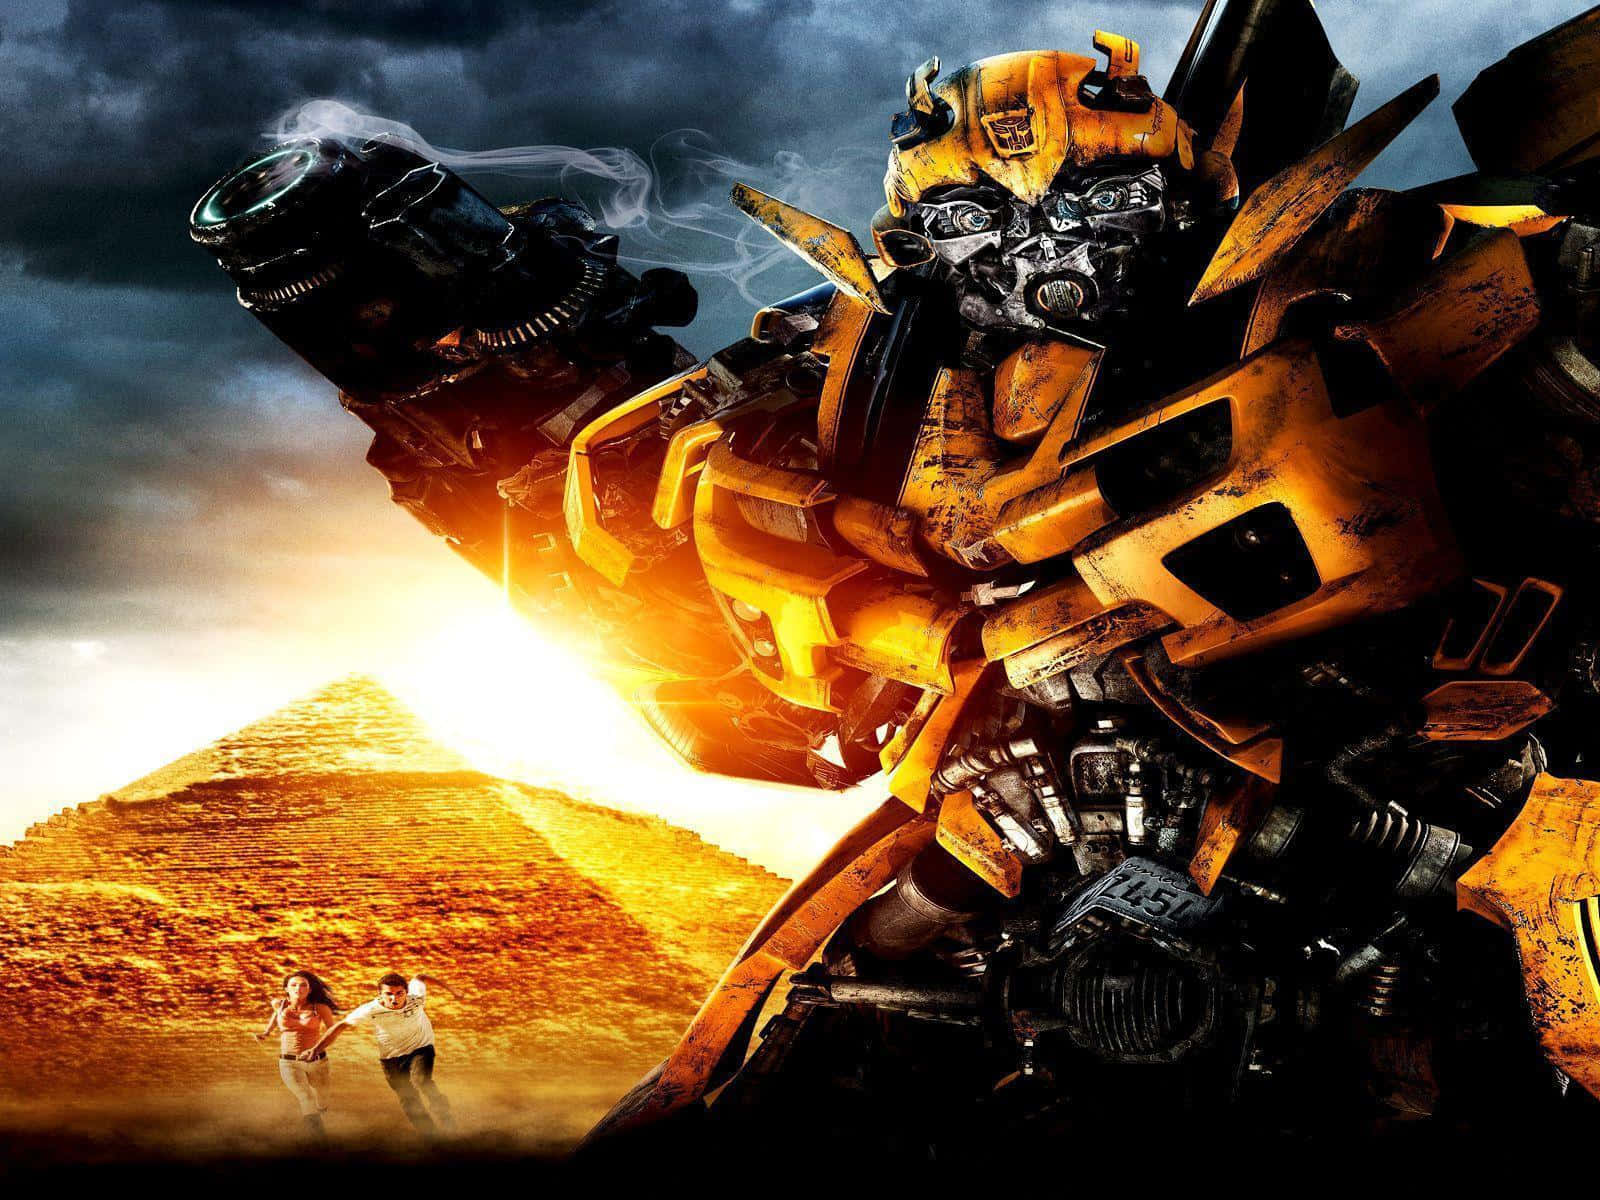 Bumblebee Stares Down The Decepticons - Ready For Action Wallpaper